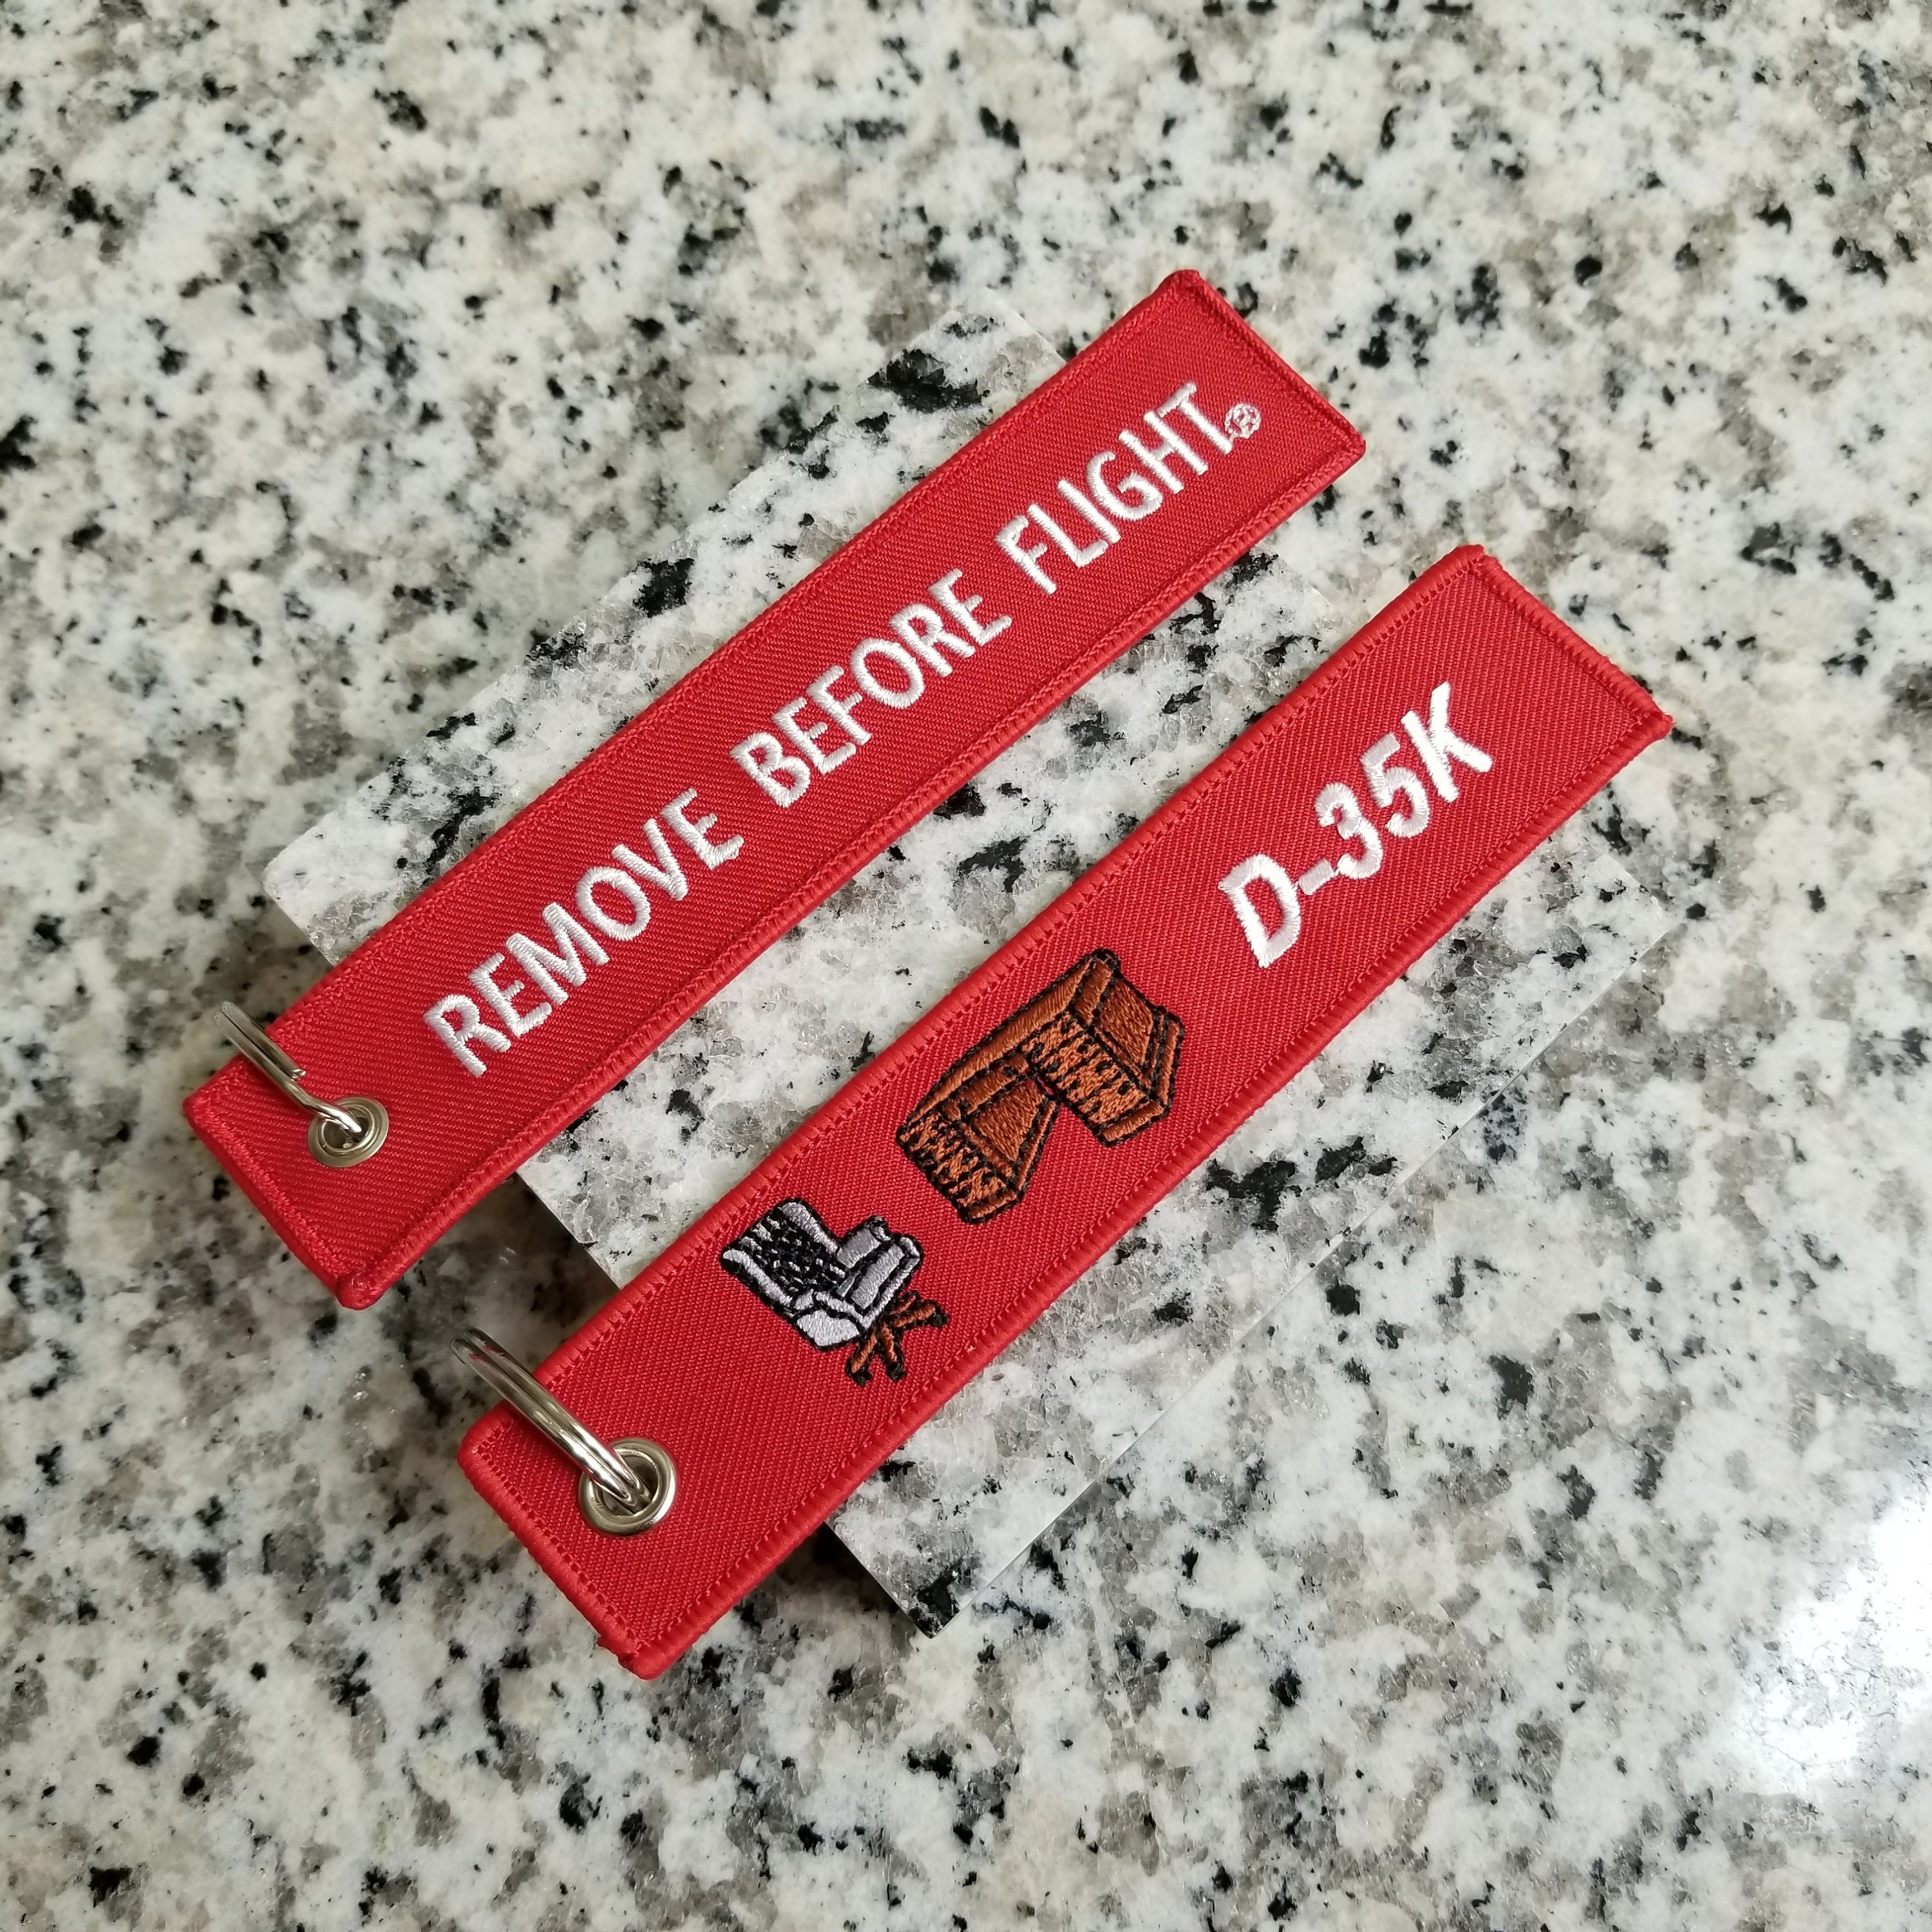 AIRCRAFT TOOLS  NEW" REMOVE BEFORE FLIGHT" KEYRING GREAT GIFT PUT ON LUGGAGE